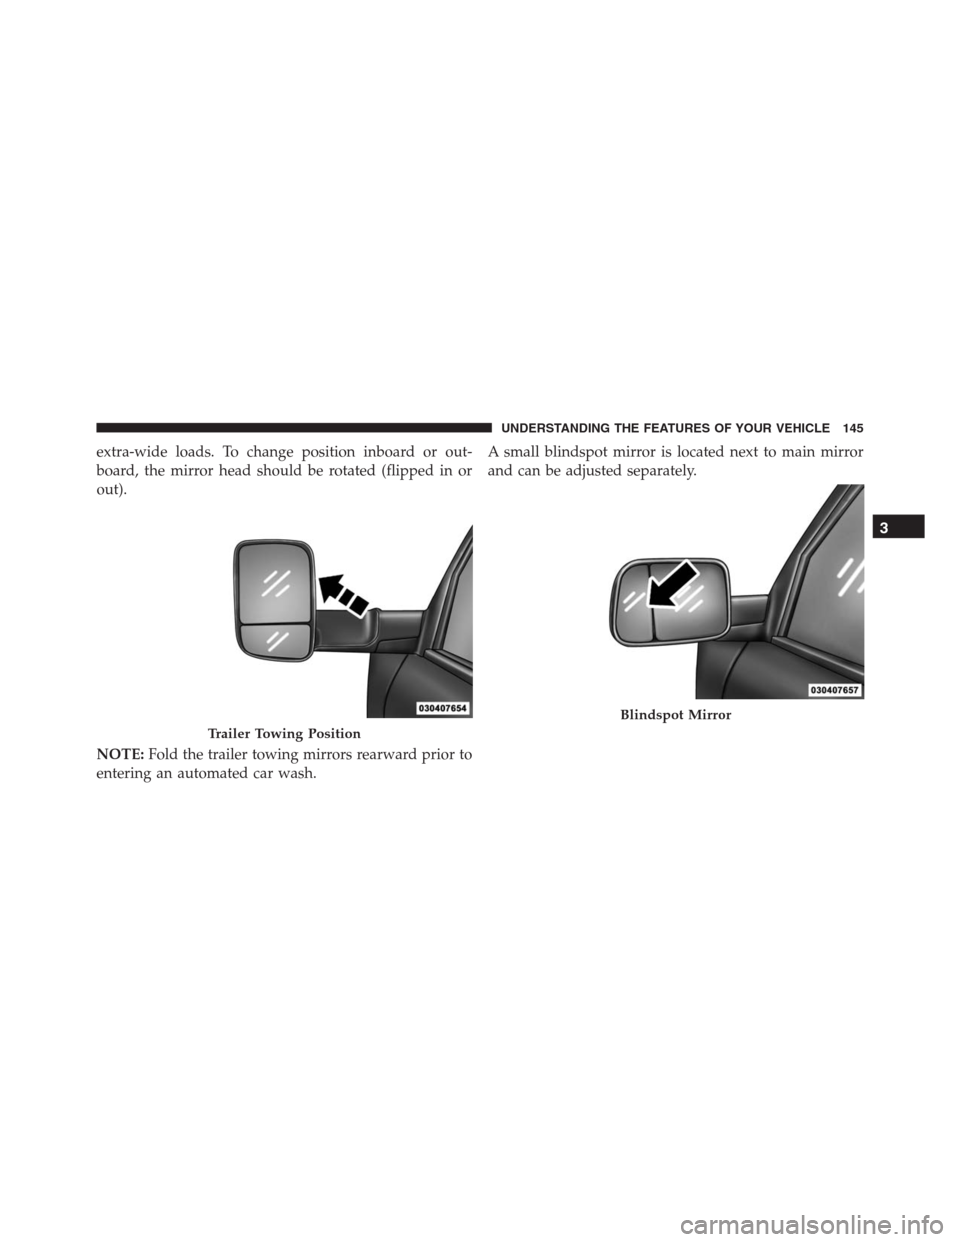 Ram 1500 2016  Owners Manual extra-wide loads. To change position inboard or out-
board, the mirror head should be rotated (flipped in or
out).
NOTE:Fold the trailer towing mirrors rearward prior to
entering an automated car wash